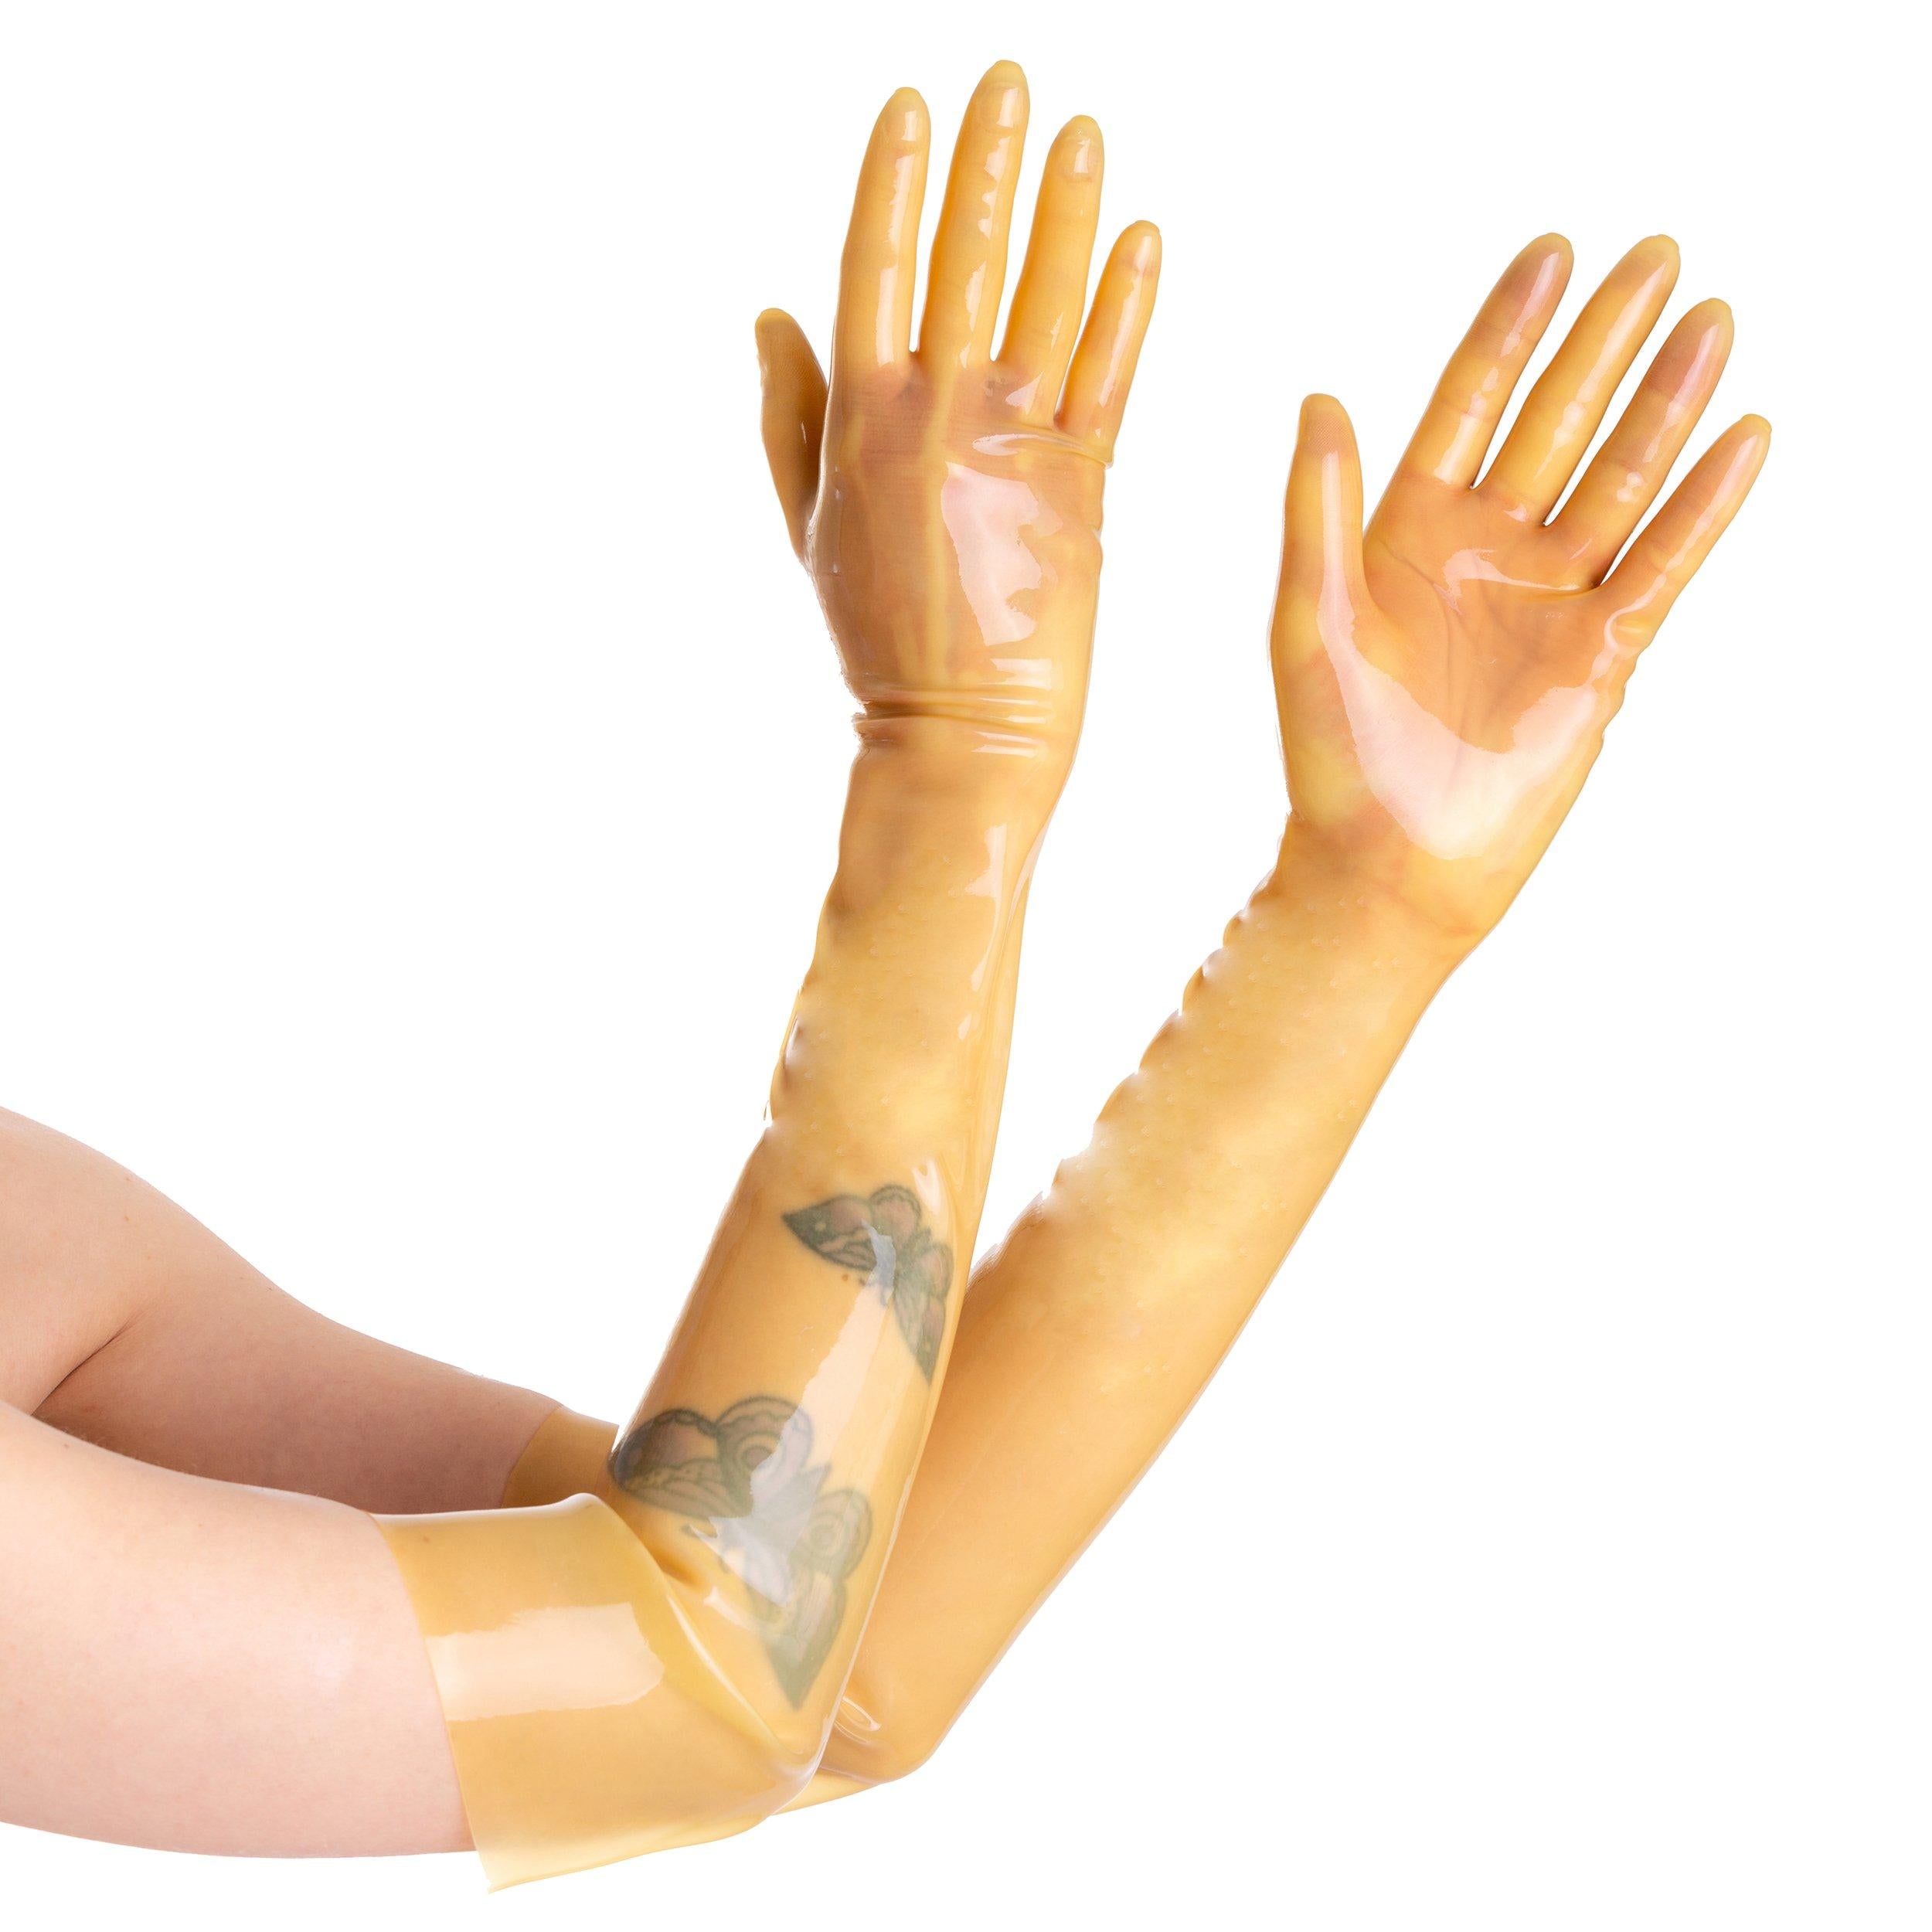 Elbow-length Latex Gloves - Sexy Rubberfashion Rubber Gloves pic